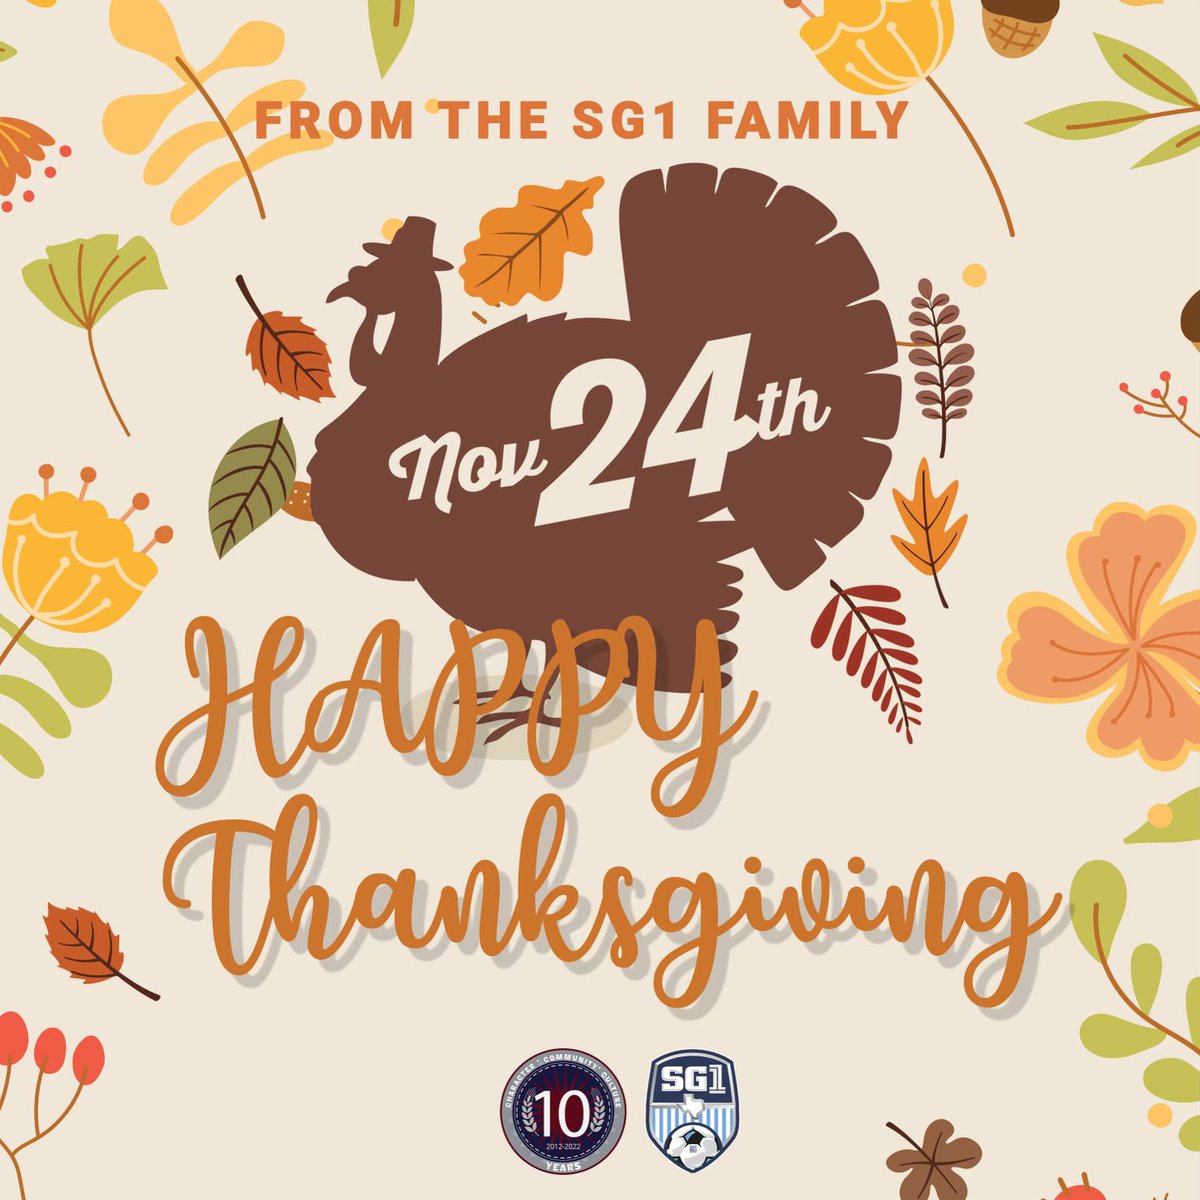 From the SG1 Family to yours, Happy Thanksgiving! 🍽🍁🦃 
.
.
.
.
@audi @mamboseafood @snowdropcc @the_federal_grill @katy_isc #sg1soccer #sg1family #thanksgiving #thanksgiving2022